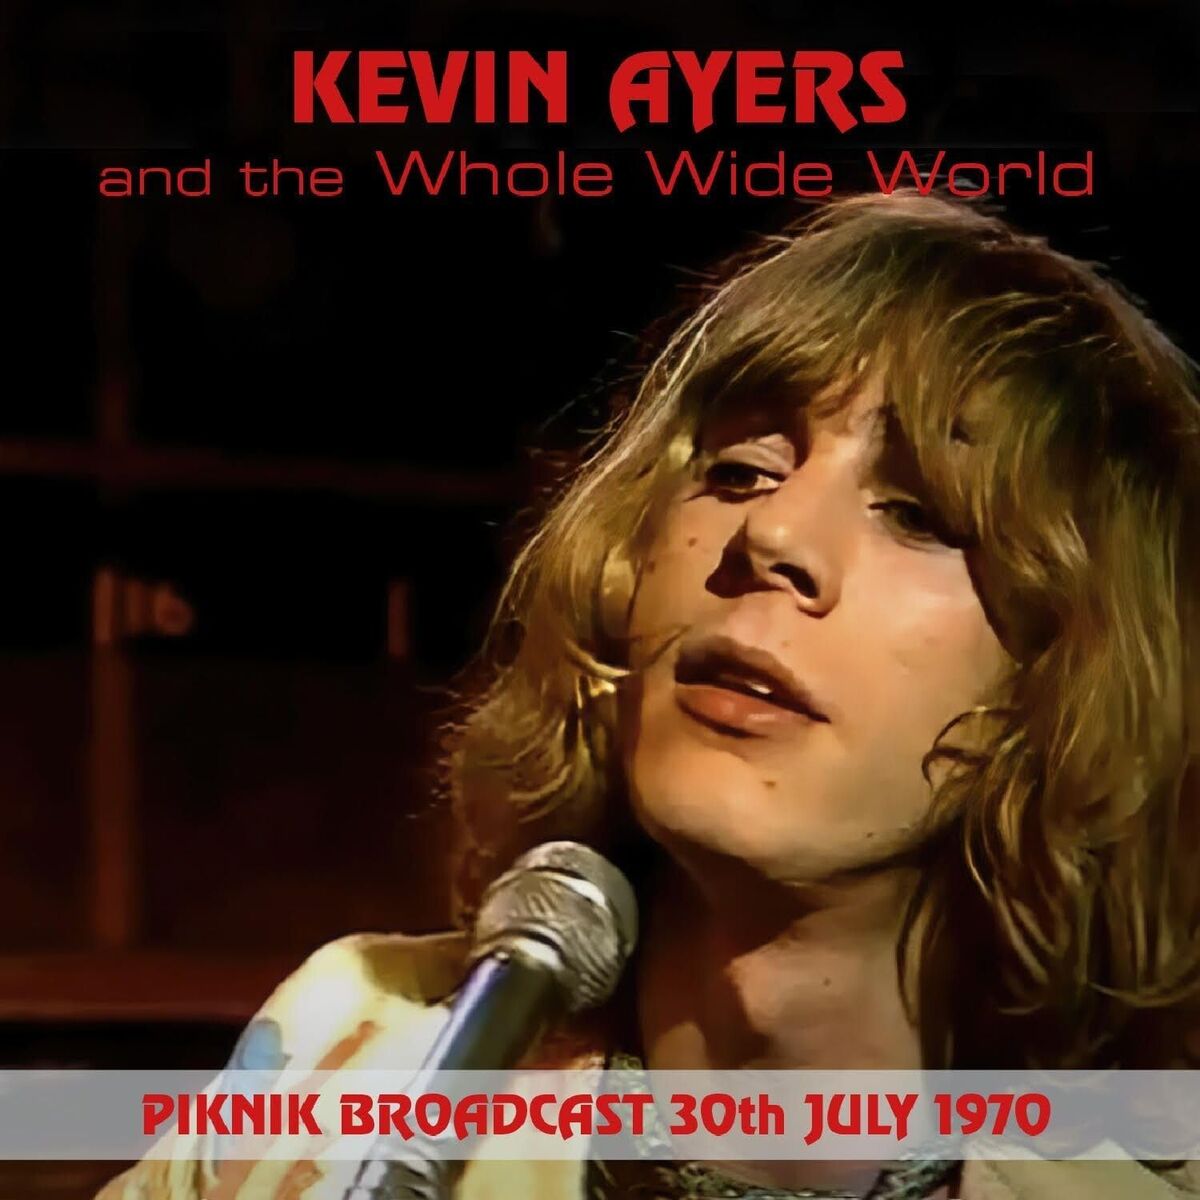 AYERS KEVIN - AND THE WHOLE WIDE WORLD - Piknik Broadcast, 30th July 1970